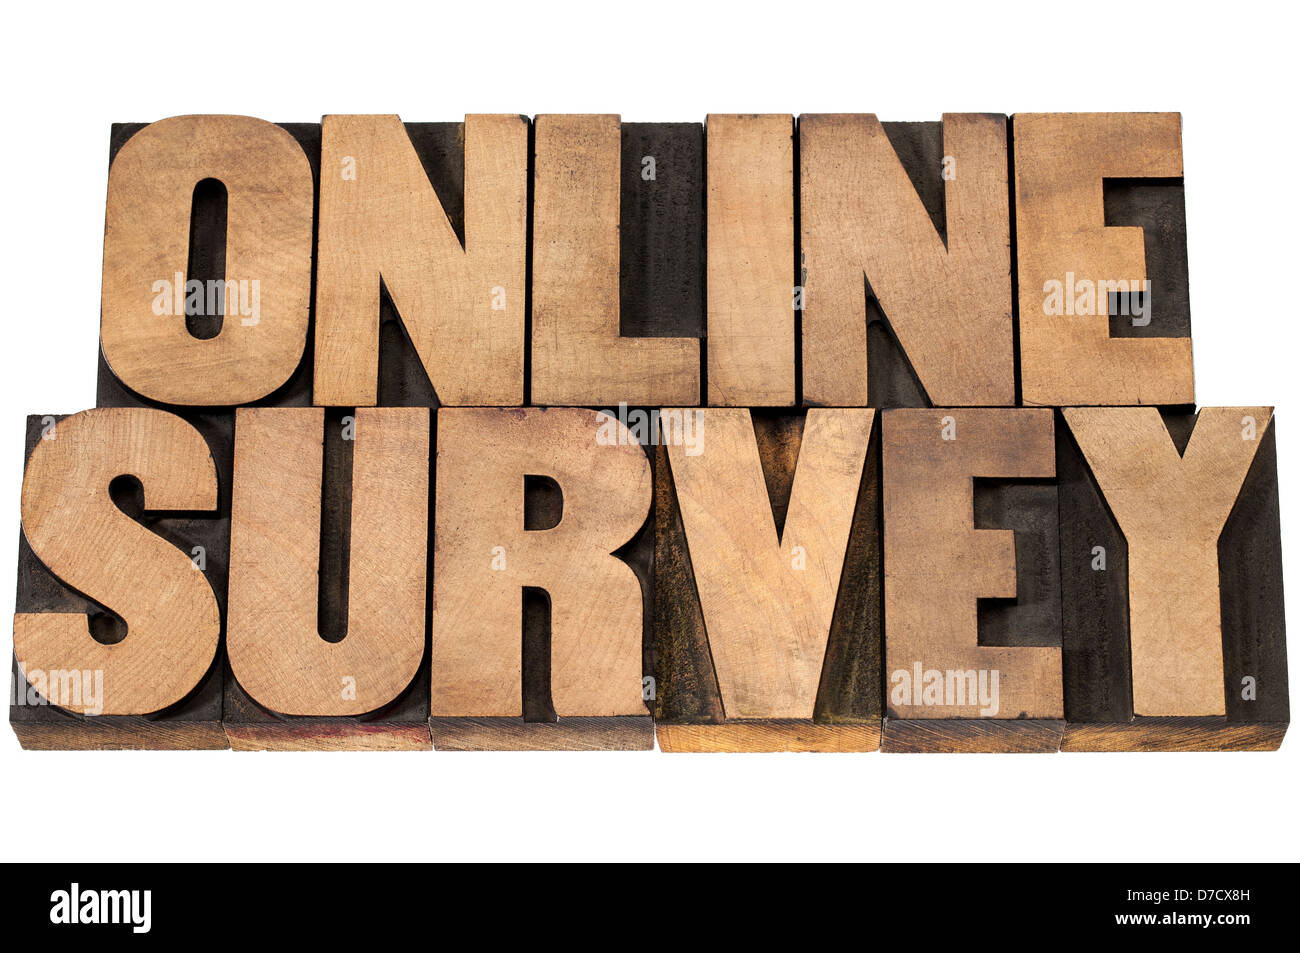 online survey - isolated text in vintage letterpress wood type printing blocks Stock Photo